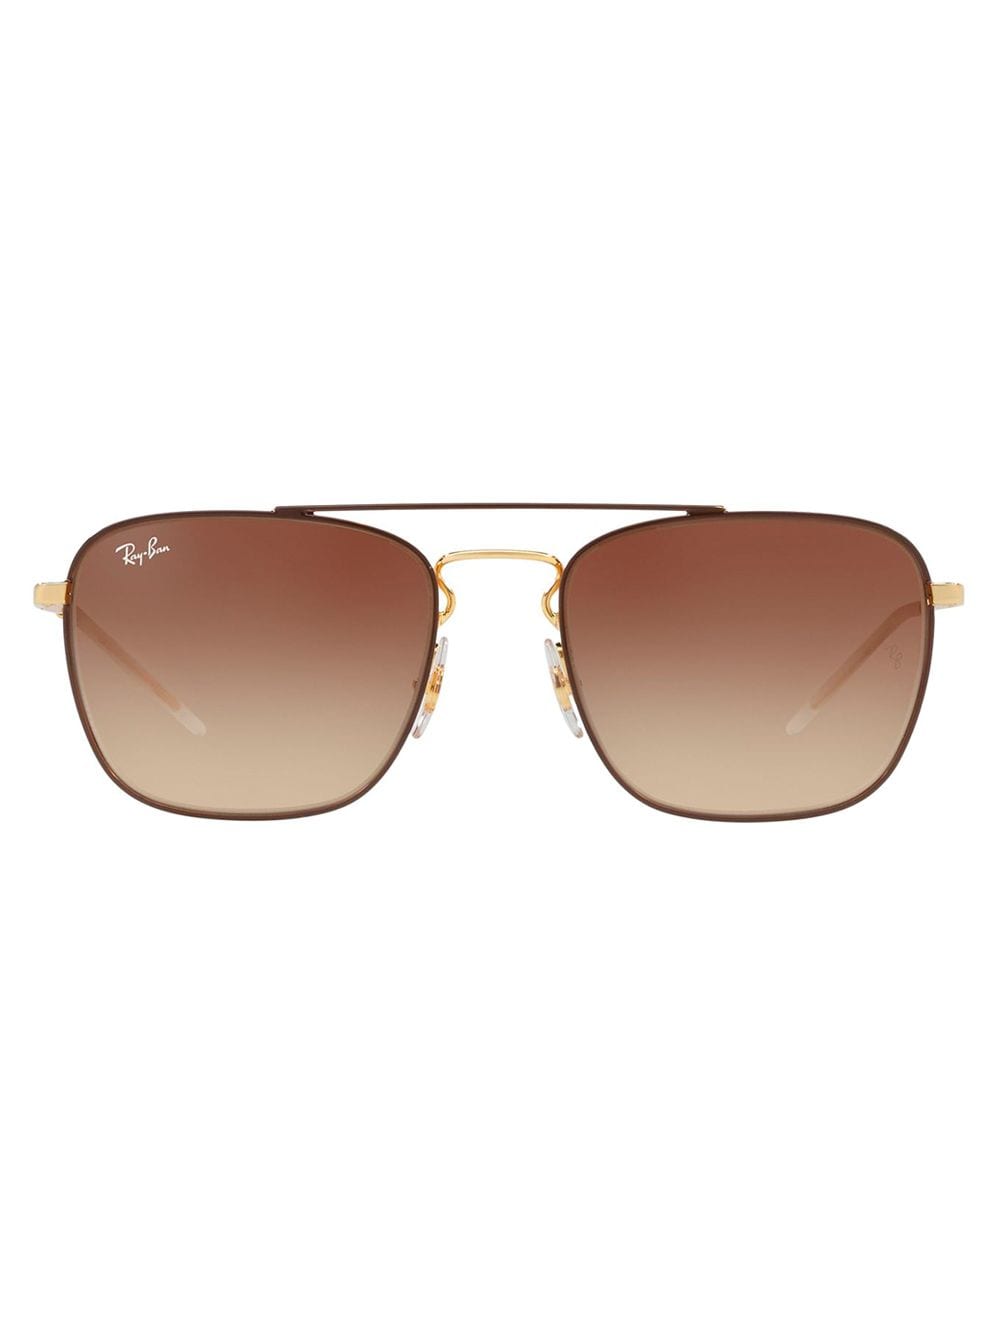 Ray-Ban square-frame sunglasses - Gold von Ray-Ban